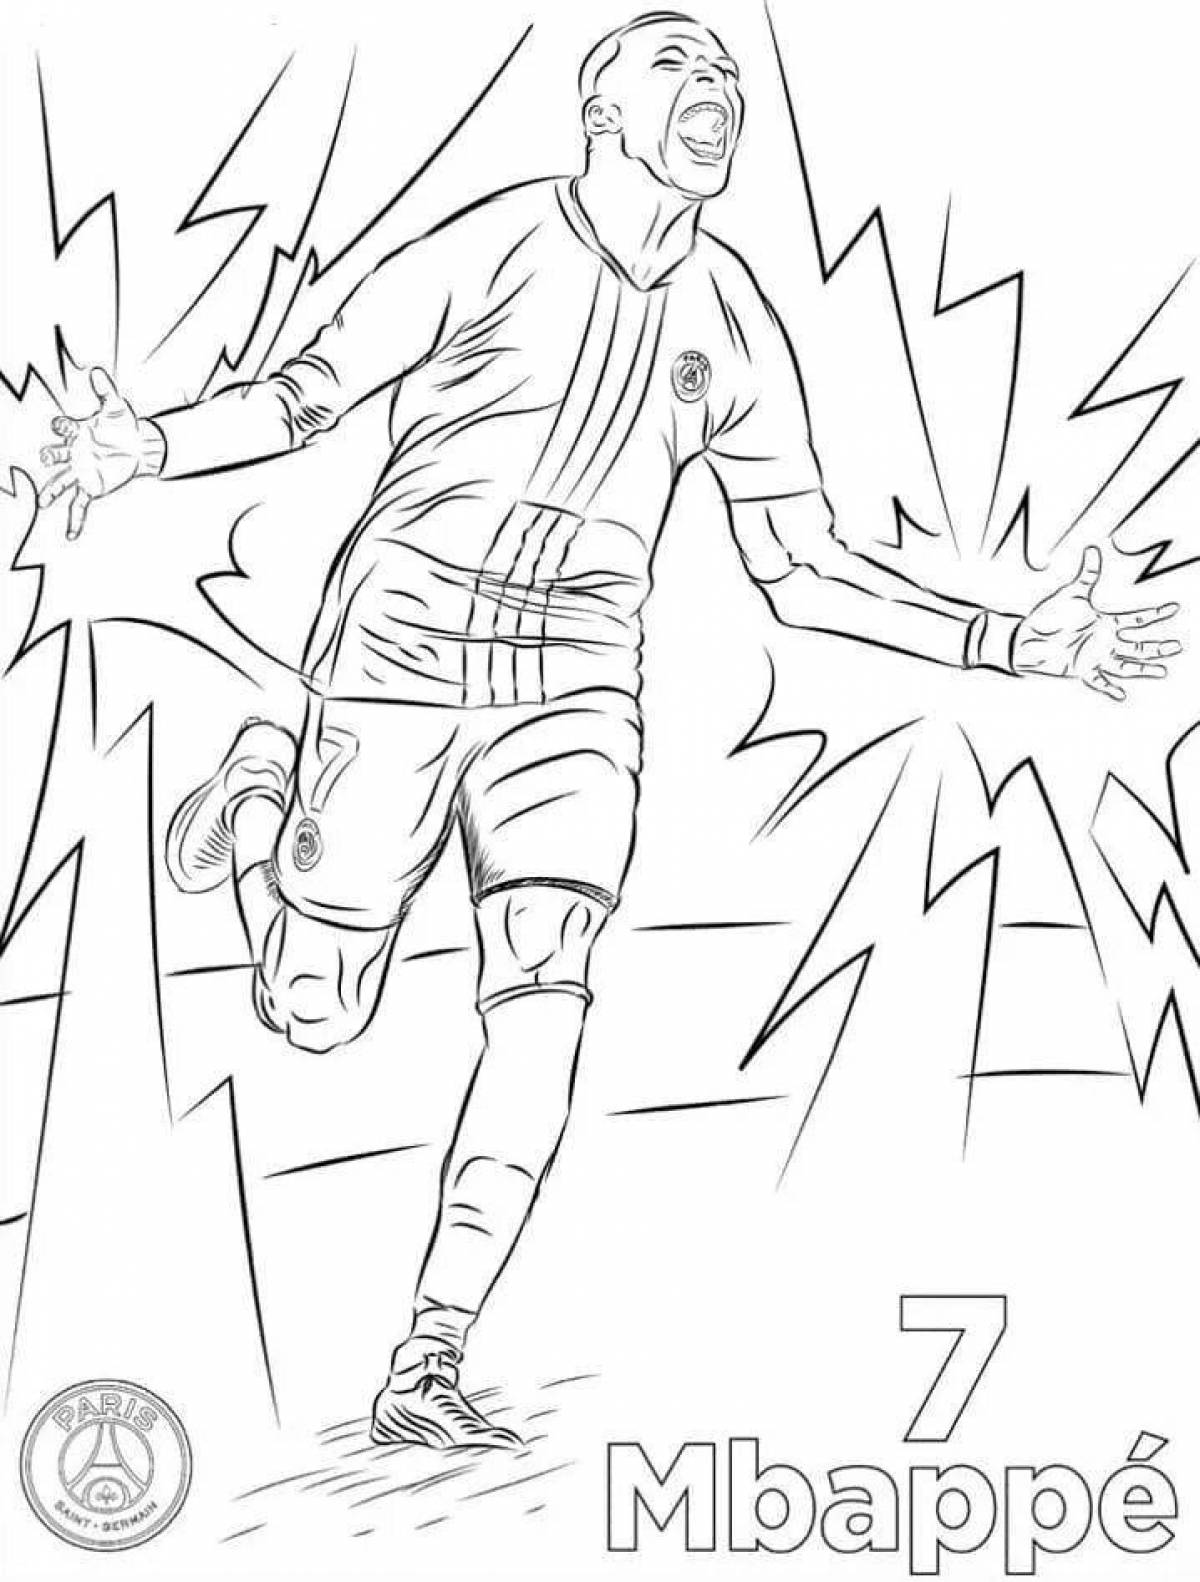 Coloring page charming soccer player